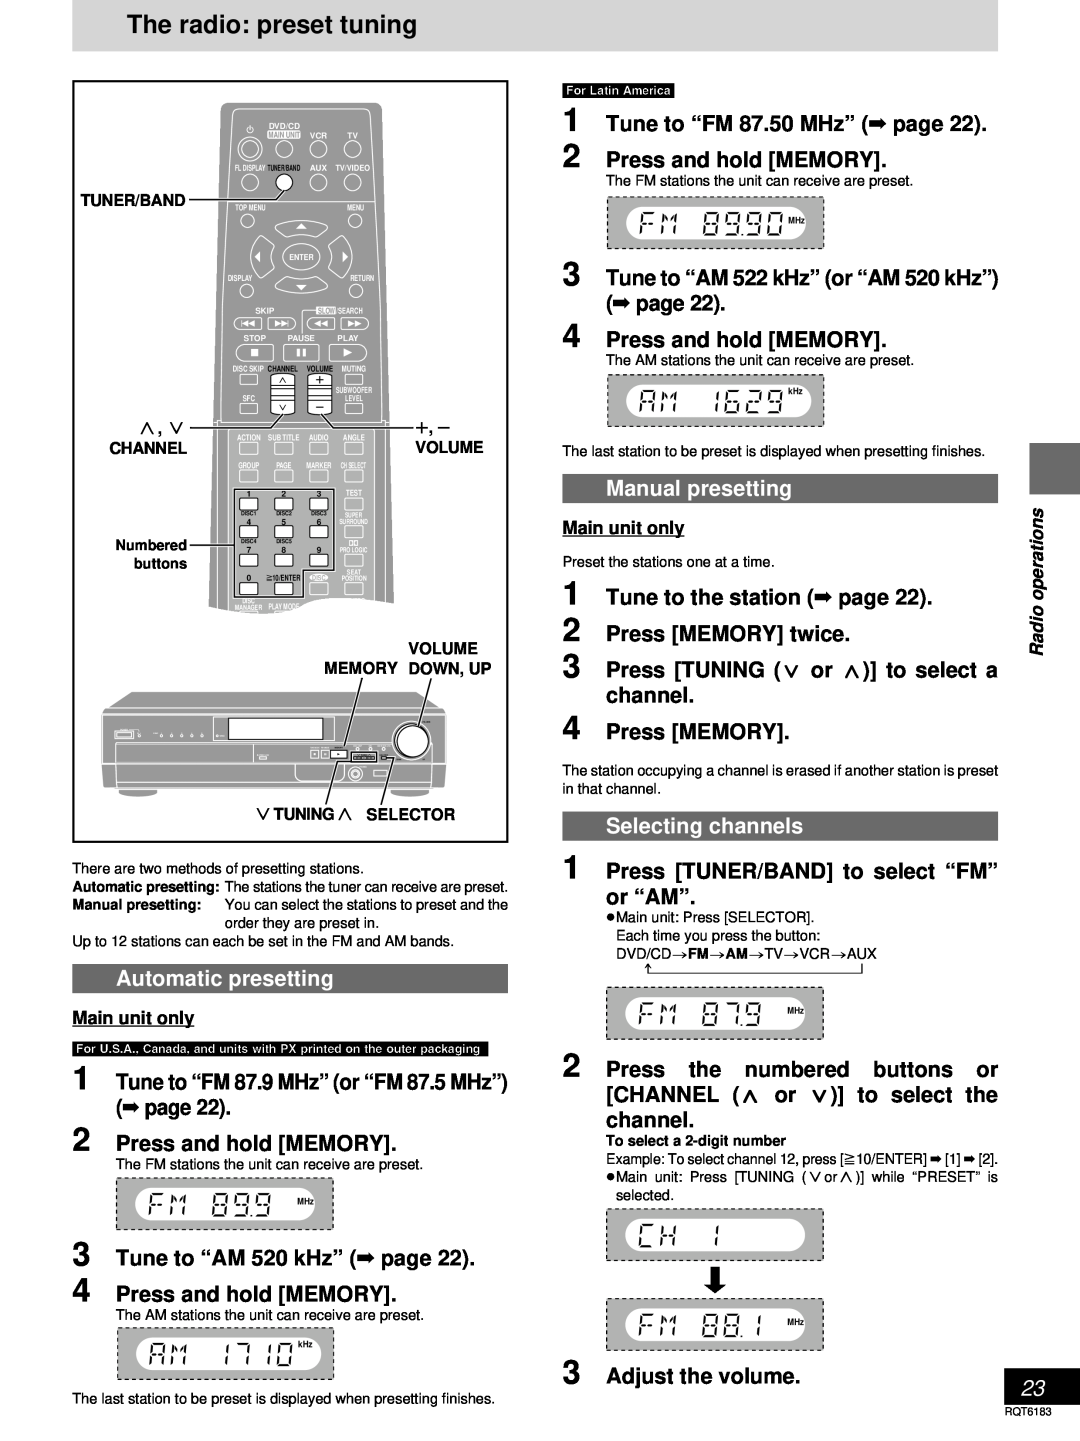 Panasonic SC-HT75 The radio preset tuning, Automatic presetting, Tune to “FM 87.9 MHz” or “FM 87.5 MHz” page, Press MEMORY 